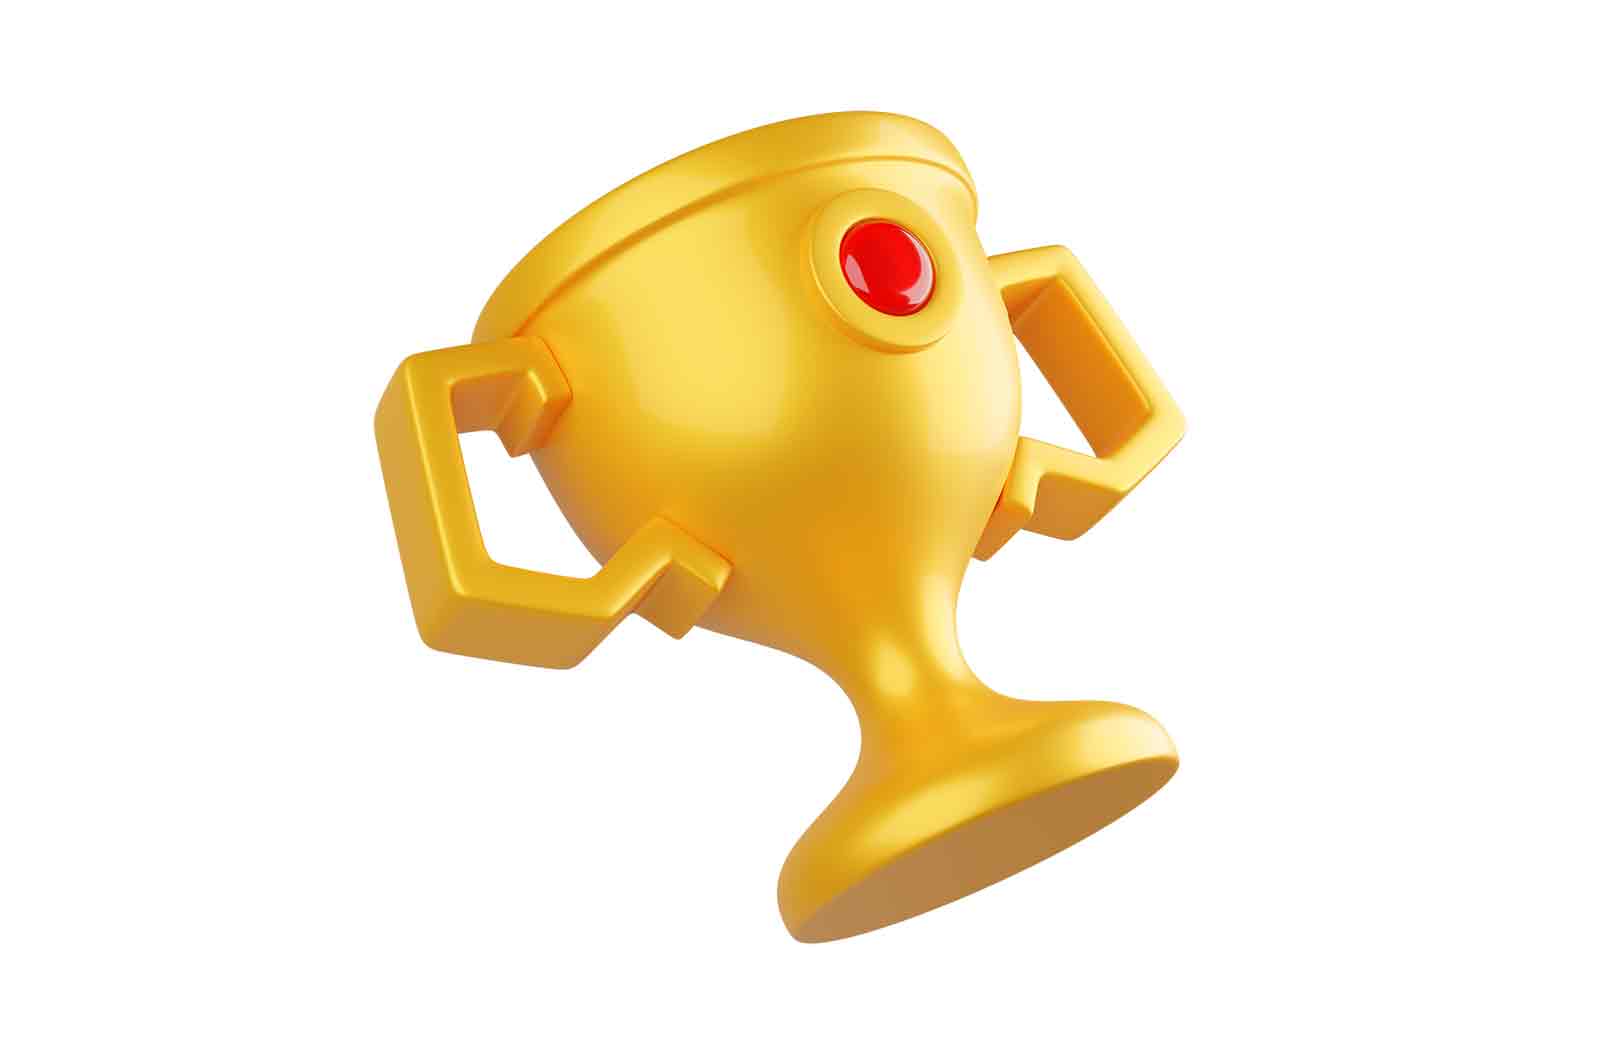 Golden trophy with red gem, 3d rendered illustration. Symbol of achievement, success, or victory.